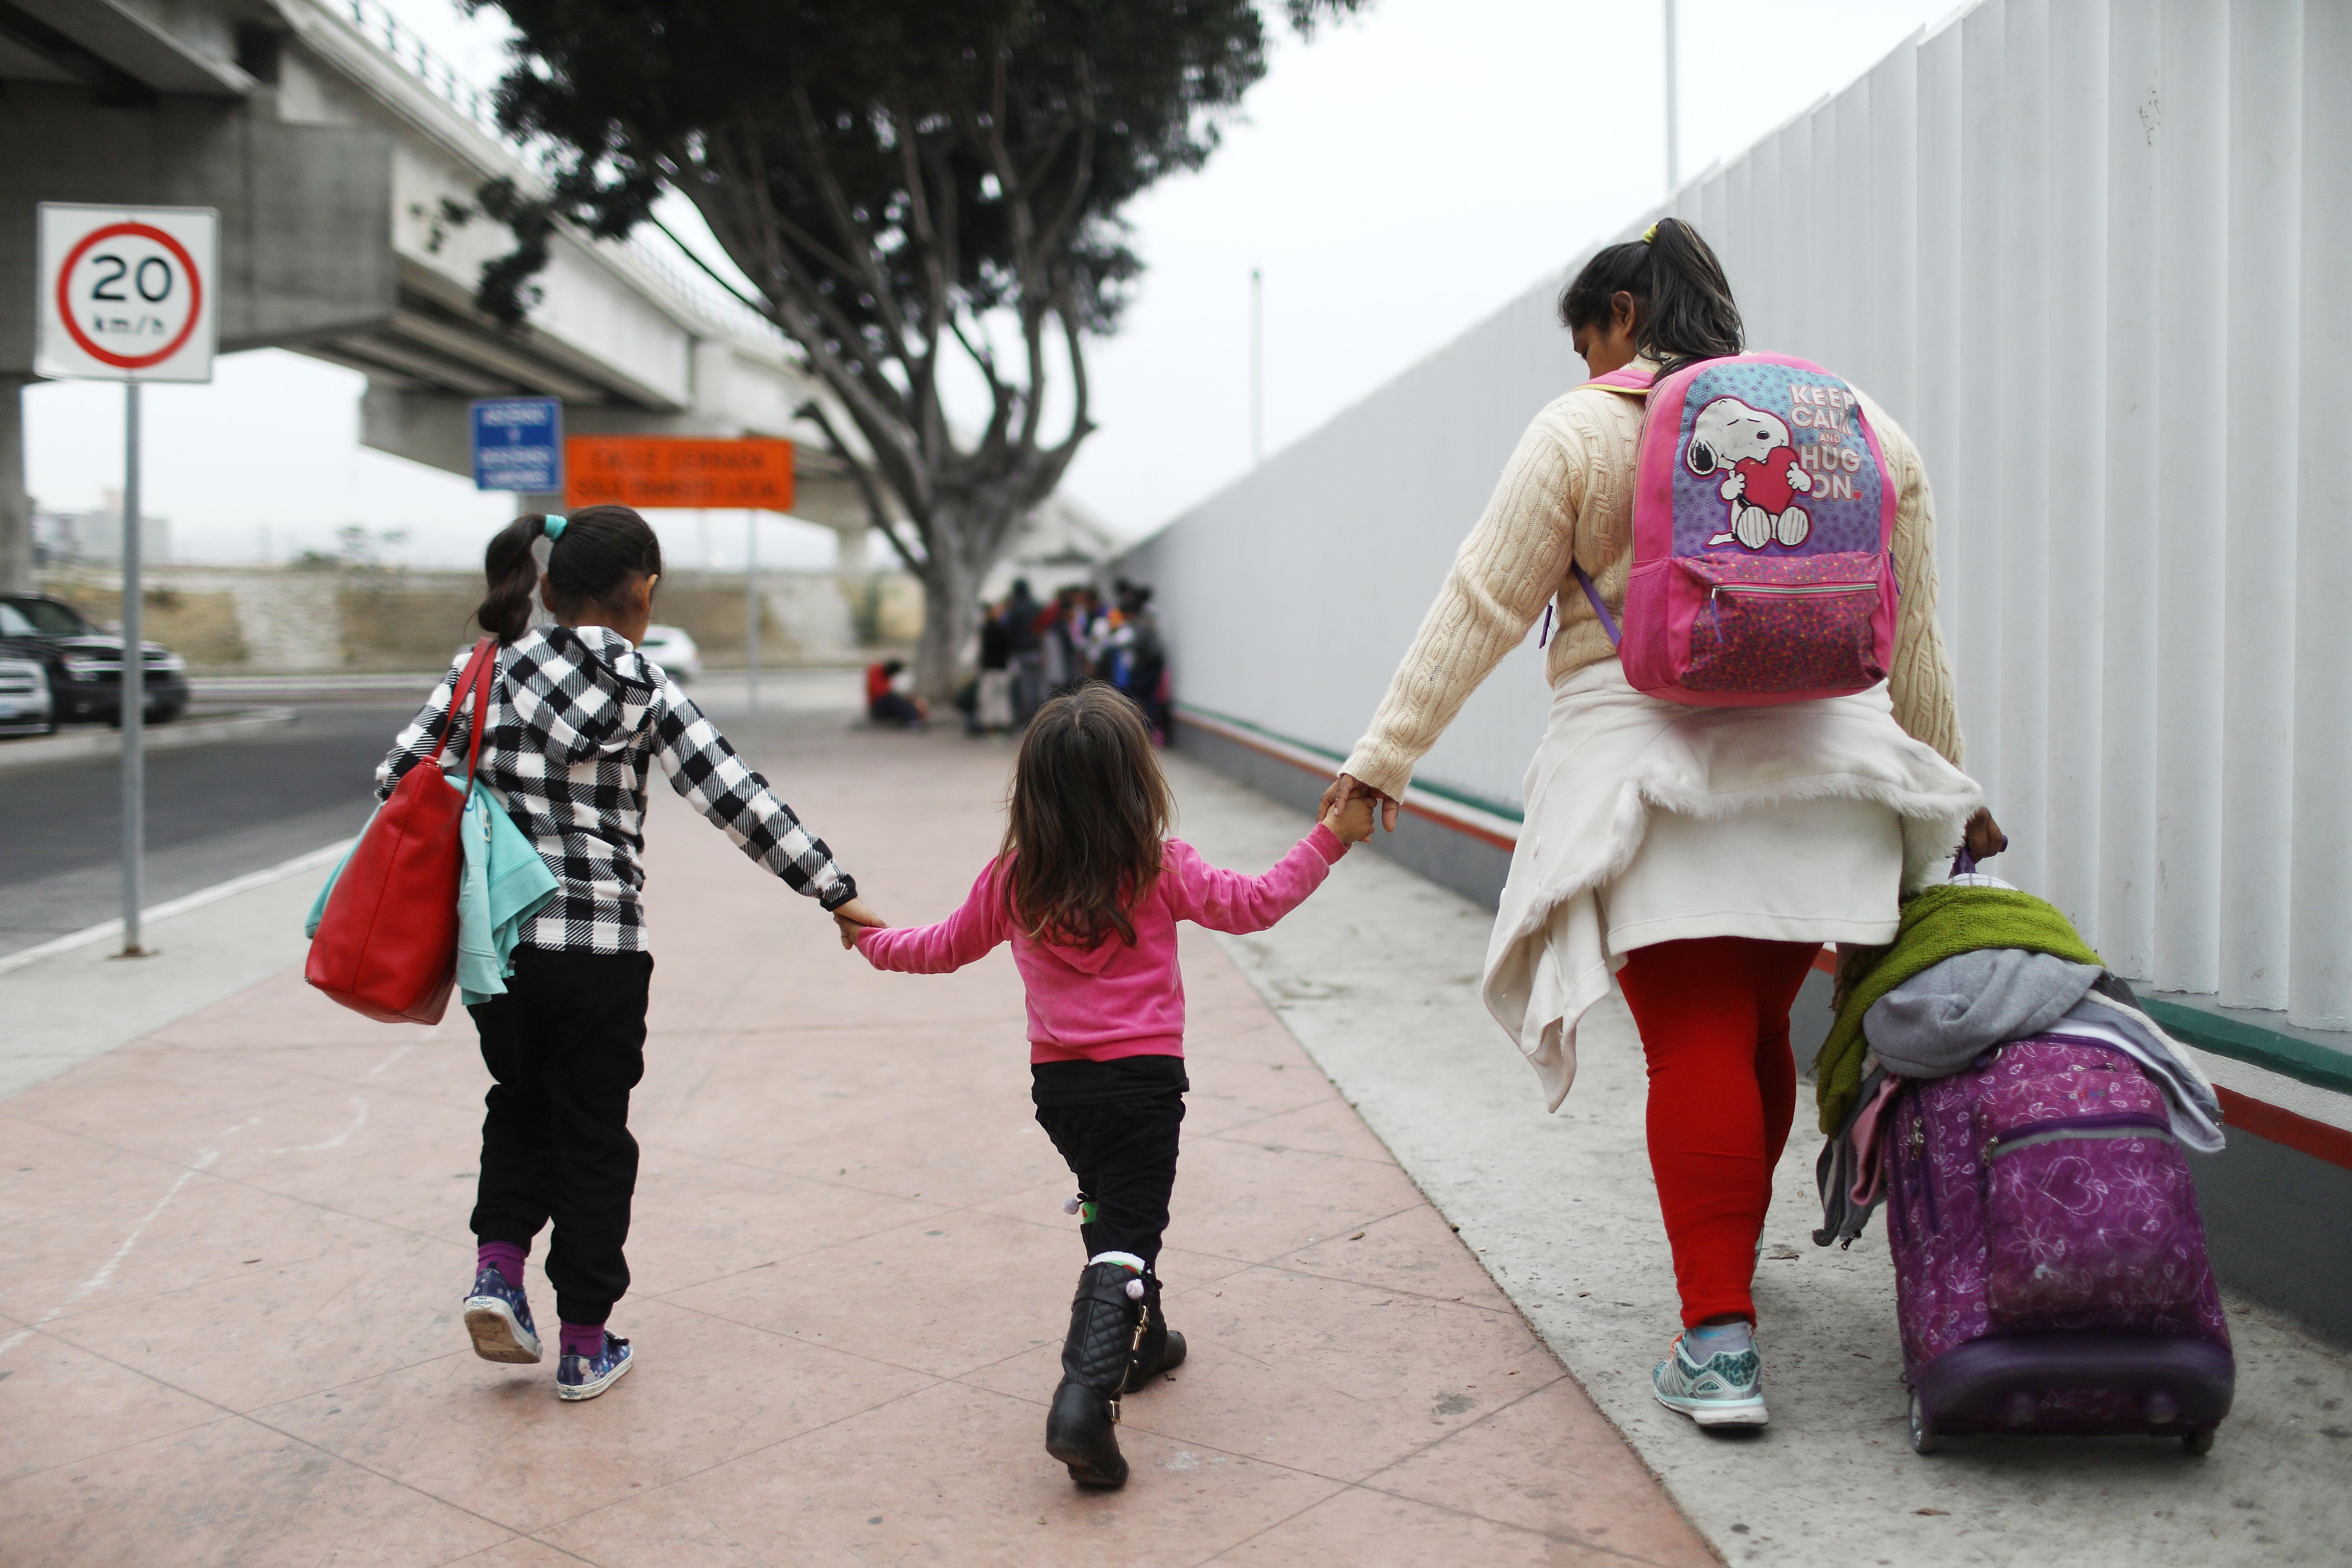 A migrant mother walks with her two daughters and their baggage along a border fence on their way to the port of entry to ask for asylum in the U.S. 